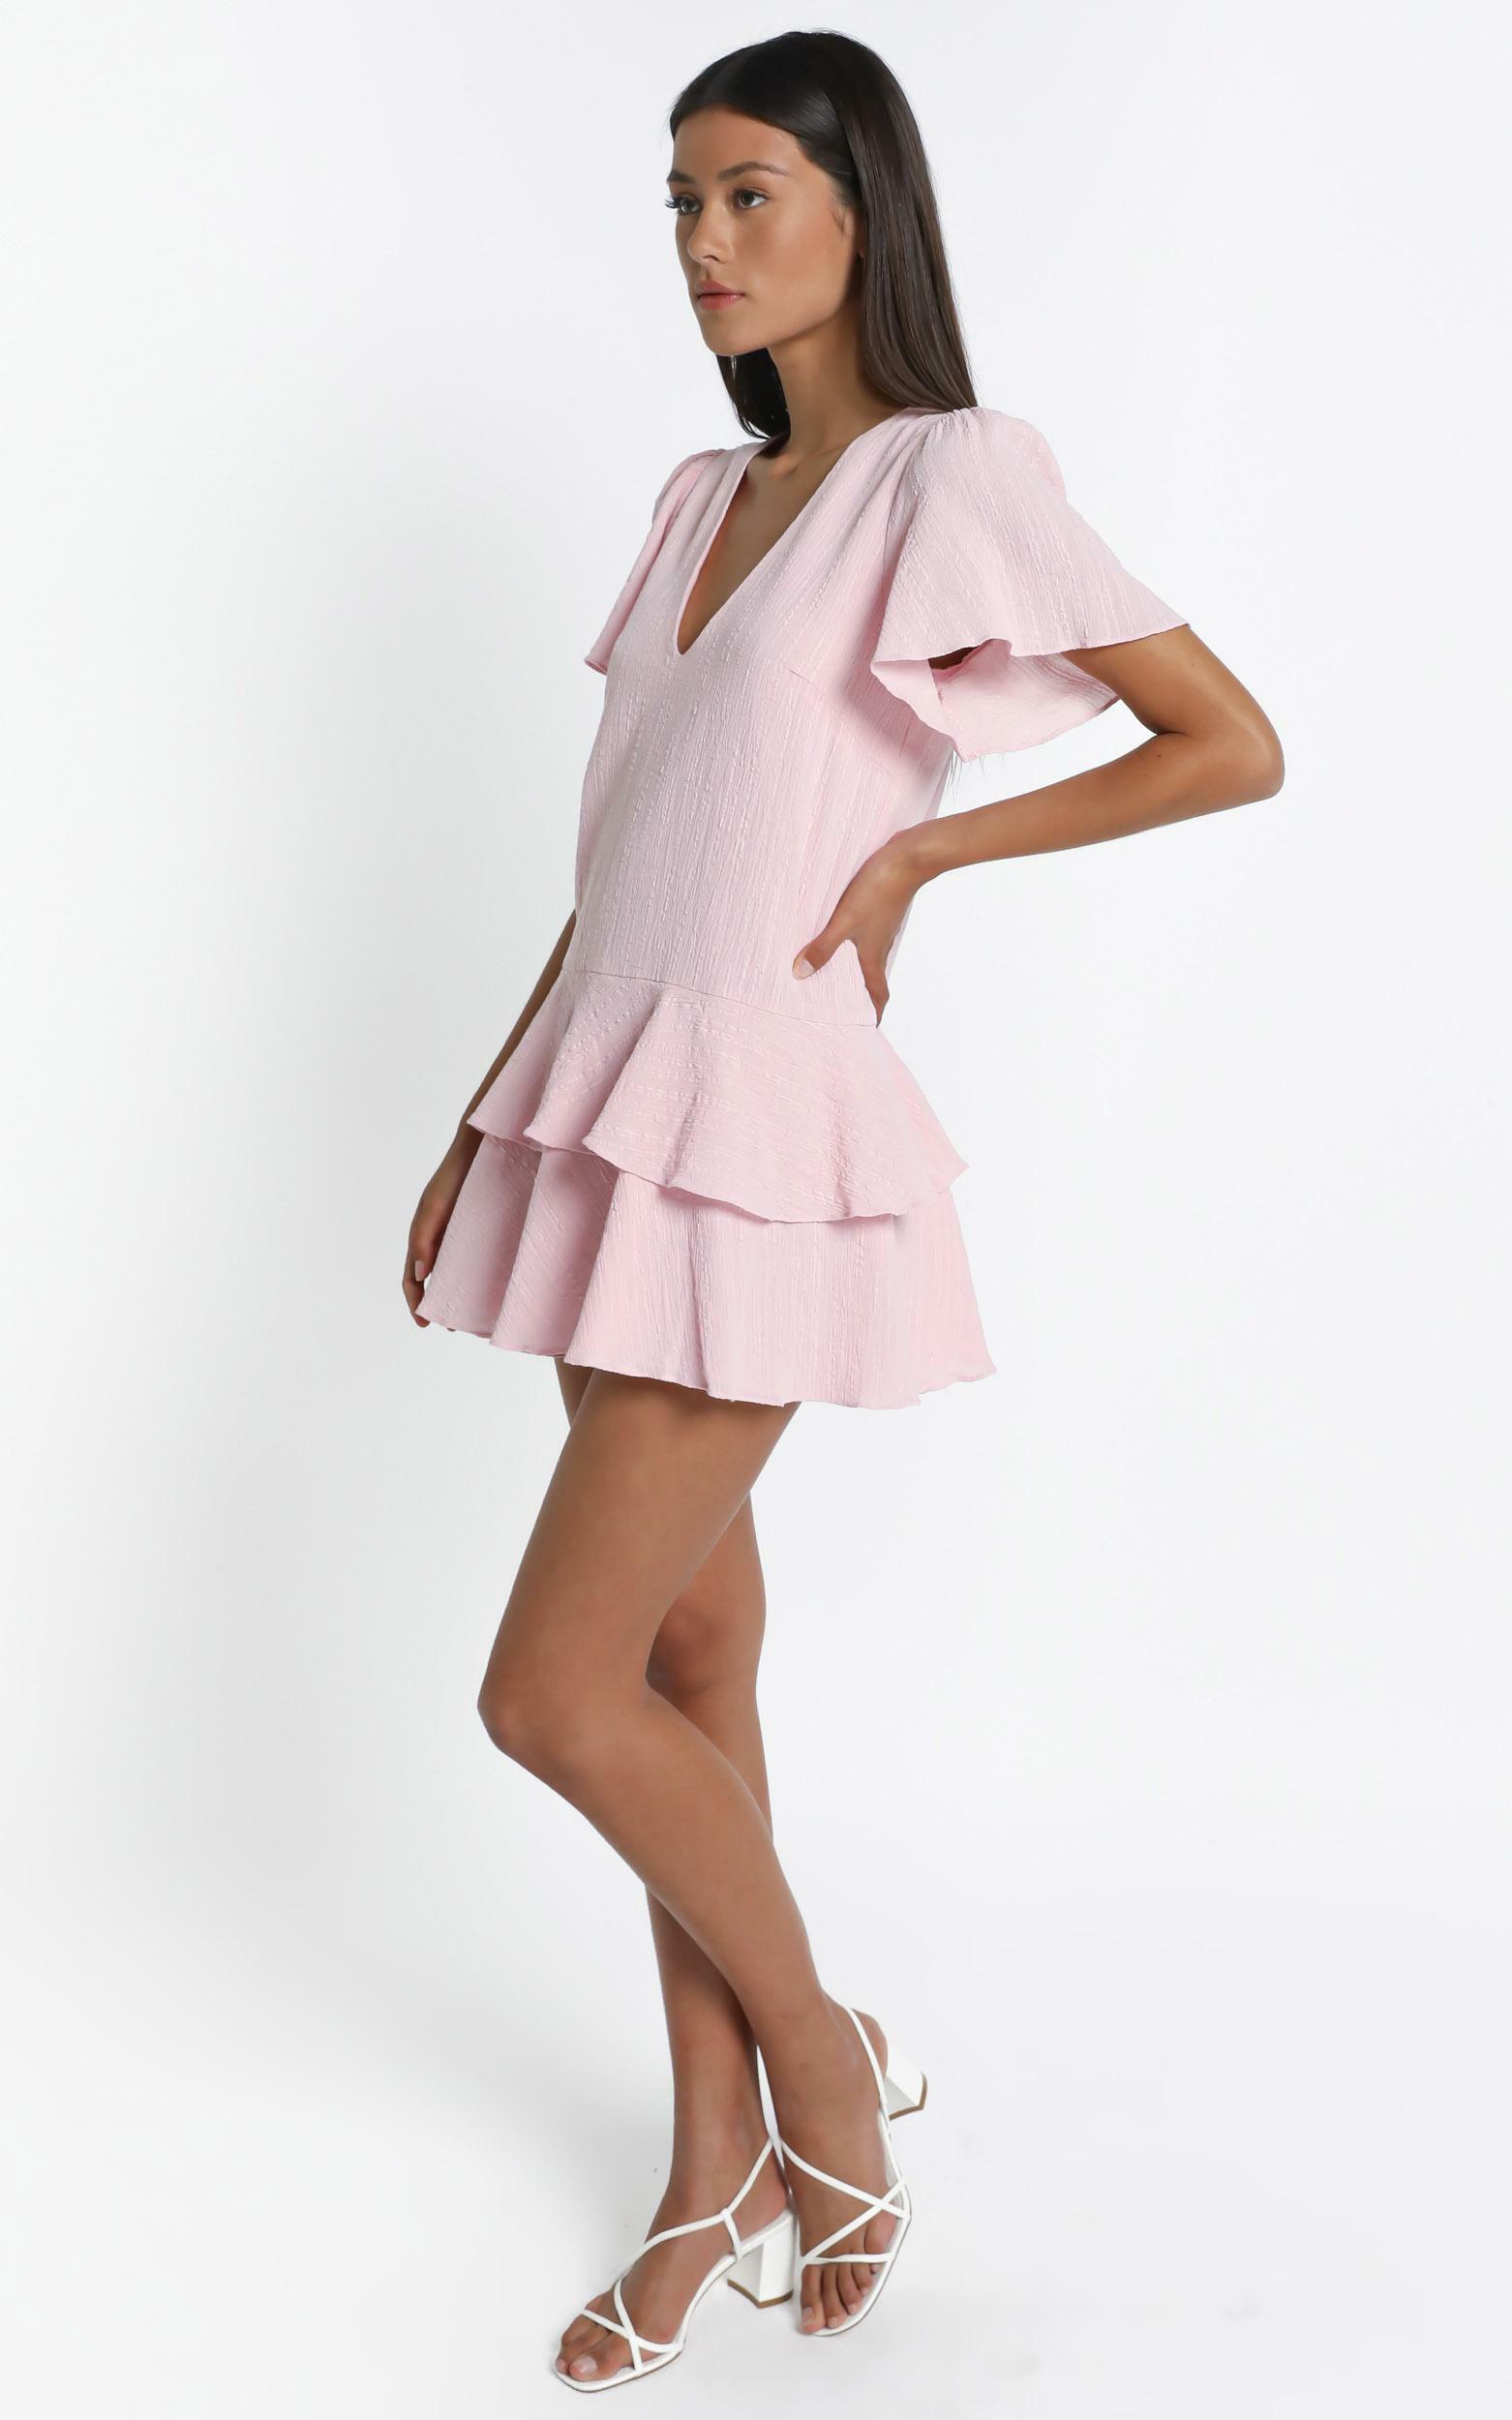 Bahama Baby Dress in Pink - 04, PNK1, hi-res image number null